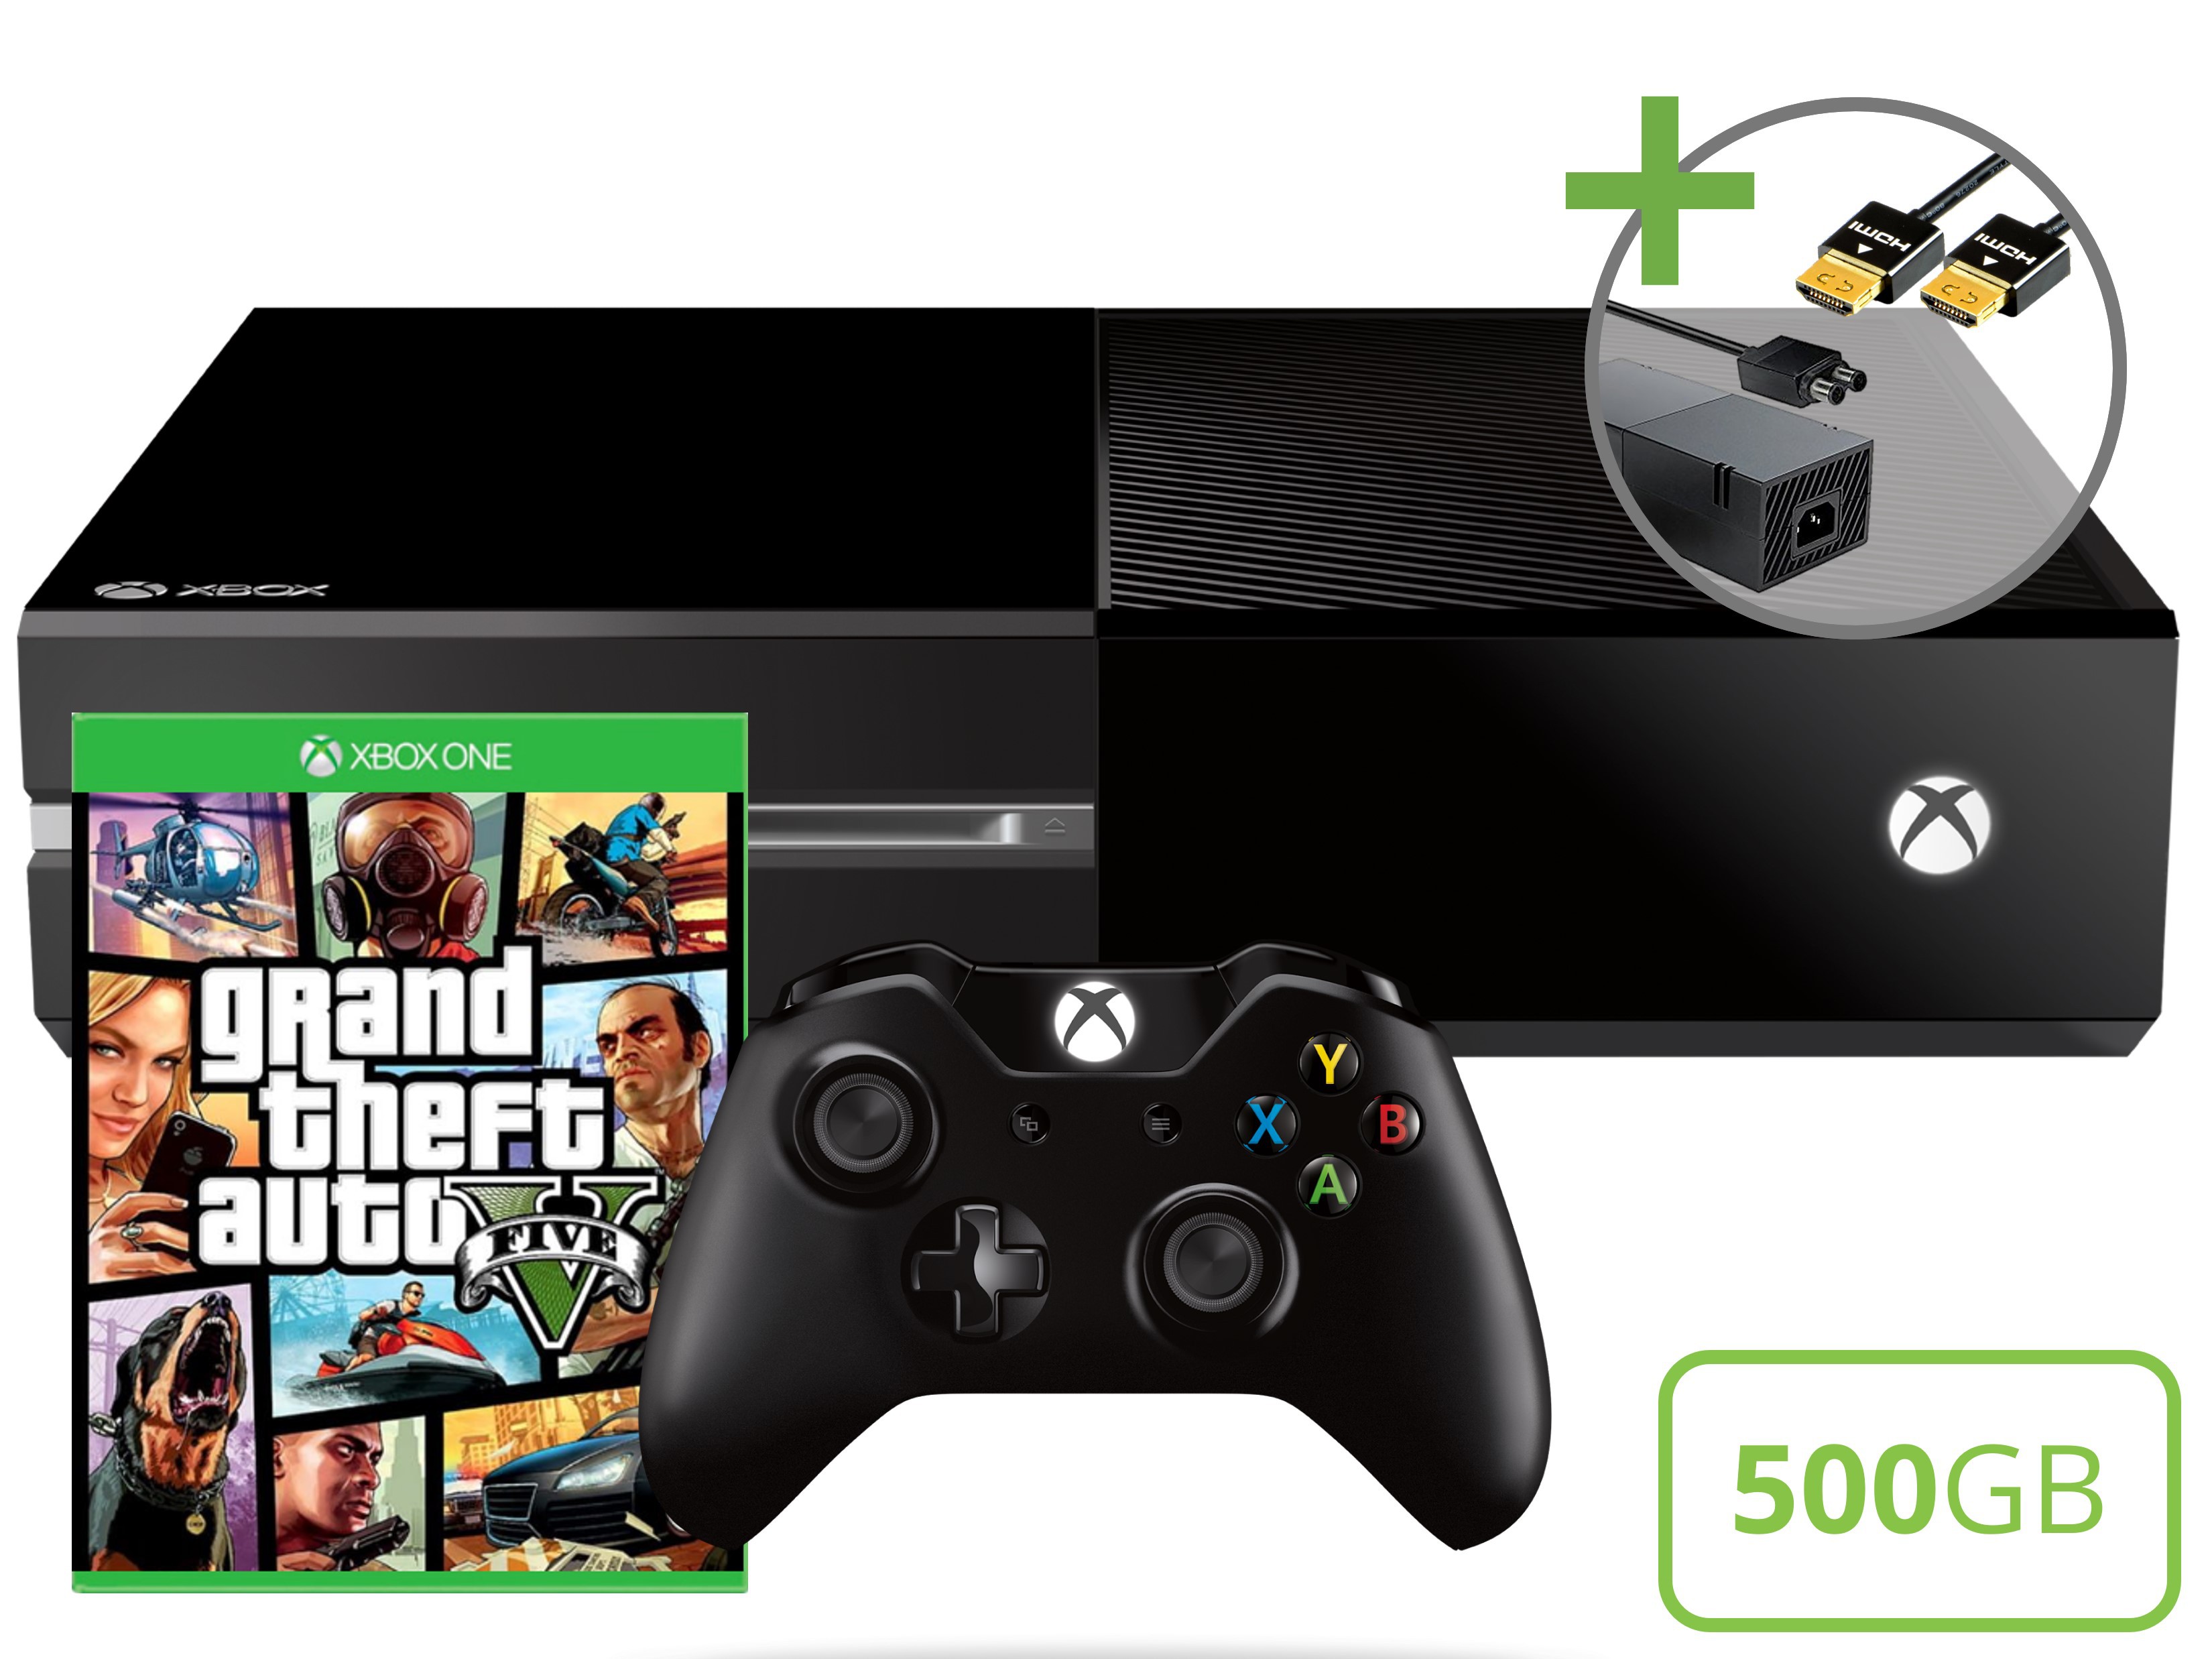 Xbox One Console Starter Pack - GTA V Edition Kopen | Xbox One Hardware